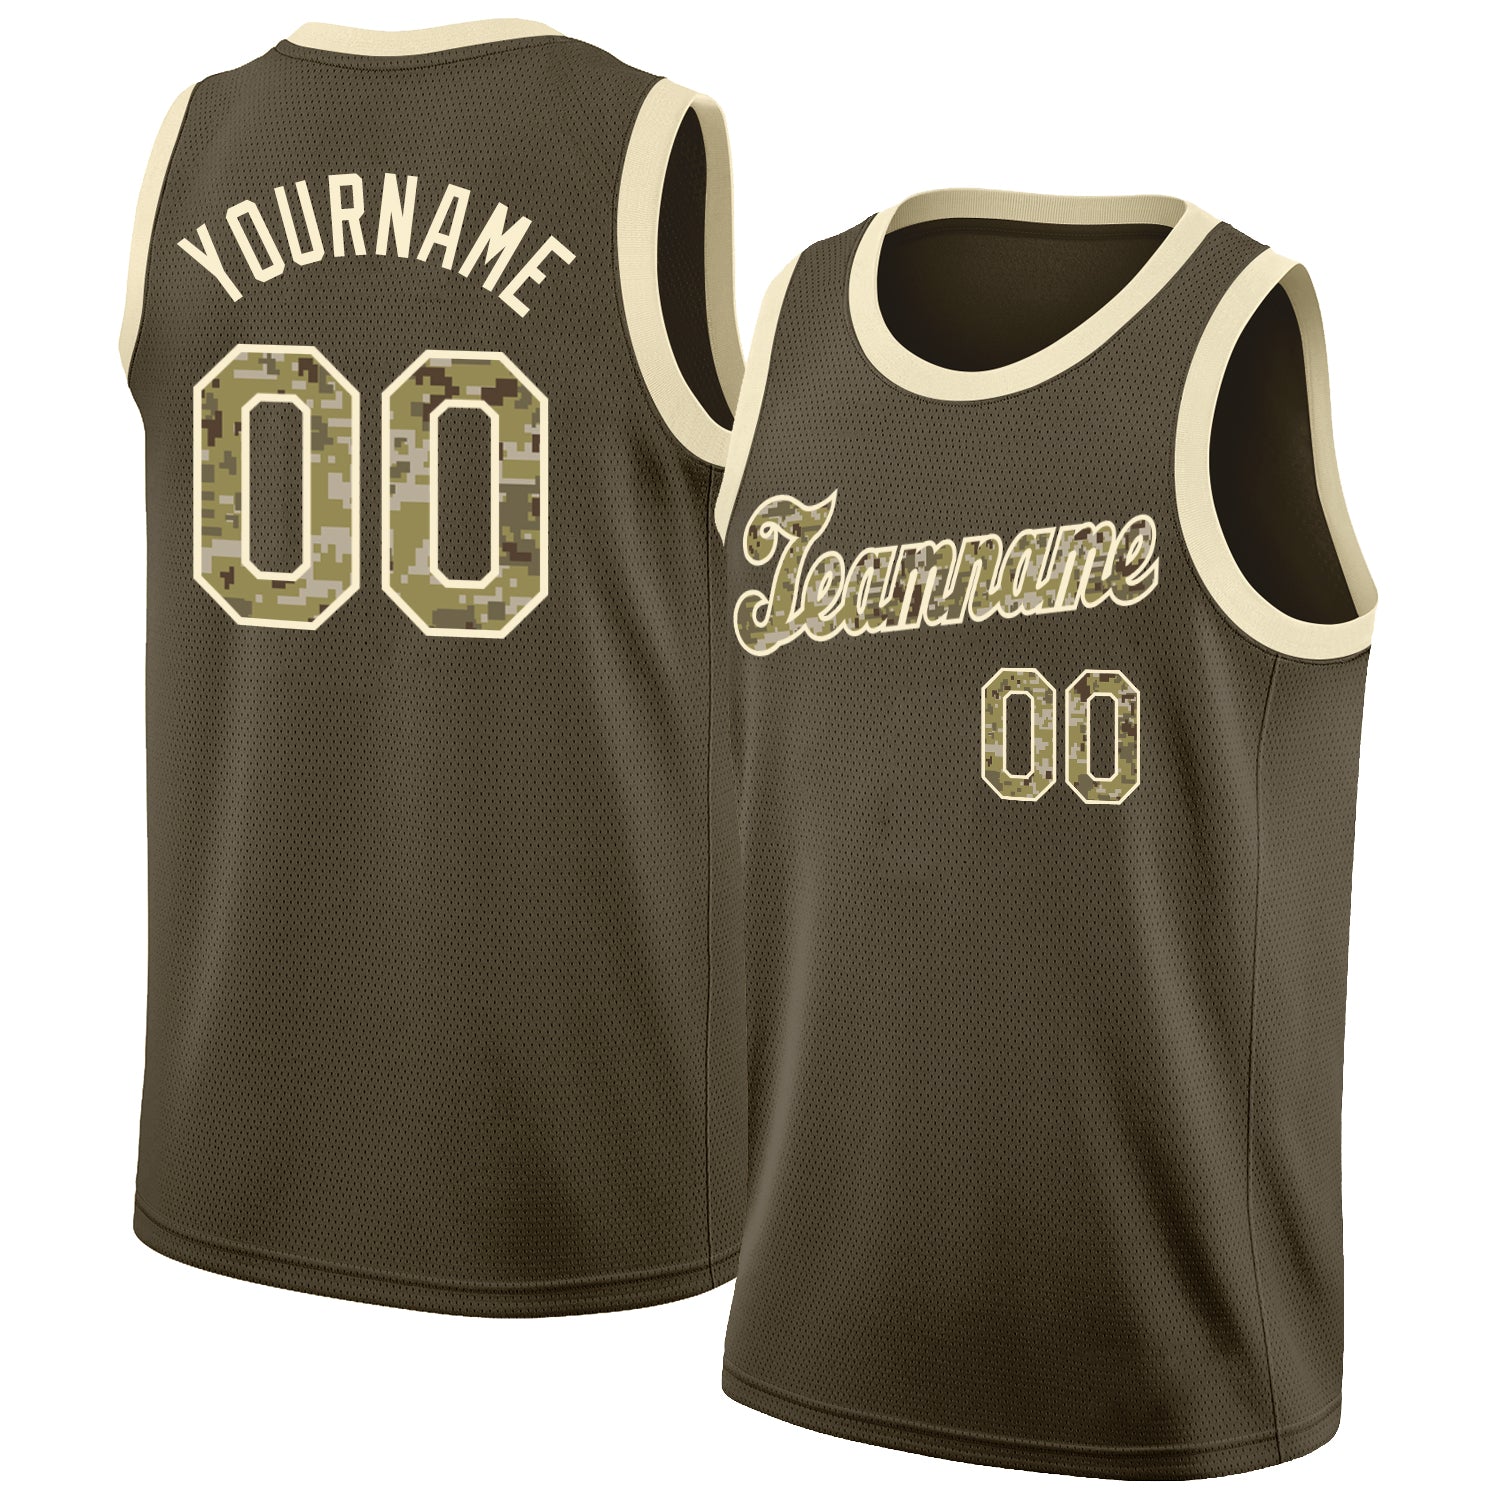 FIITG Custom Basketball Suit Jersey Camo Olive-White Round Neck Sublimation Salute to Service